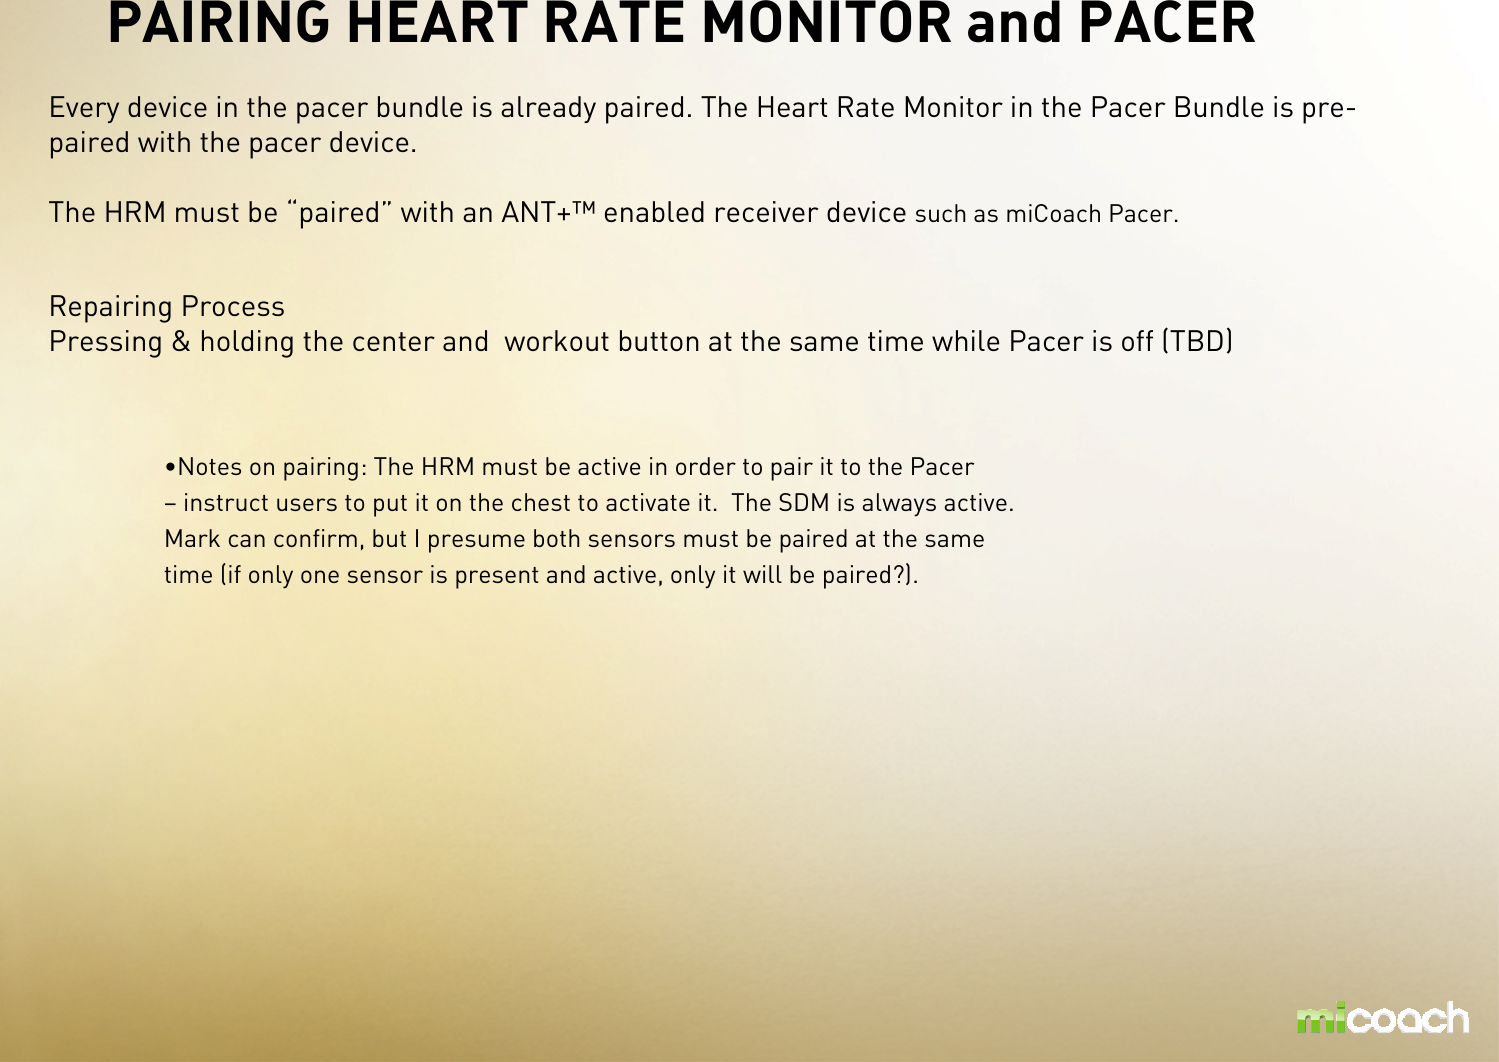 PAIRING HEART RATE MONITOR and PACER Every device in the pacer bundle is already paired. The Heart Rate Monitor in the Pacer Bundle is pre-paired with the pacer device.The HRM must be “paired” with an ANT+™ enabled receiver device such as miCoach Pacer.Repairing ProcessPressing &amp; holding the center and  workout button at the same time while Pacer is off (TBD)•Notes on pairing: The HRM must be active in order to pair it to the Pacer – instruct users to put it on the chest to activate it. The SDM is always active. Mark can confirm, but I presume both sensors must be paired at the same time (if only one sensor is present and active, only it will be paired?). 